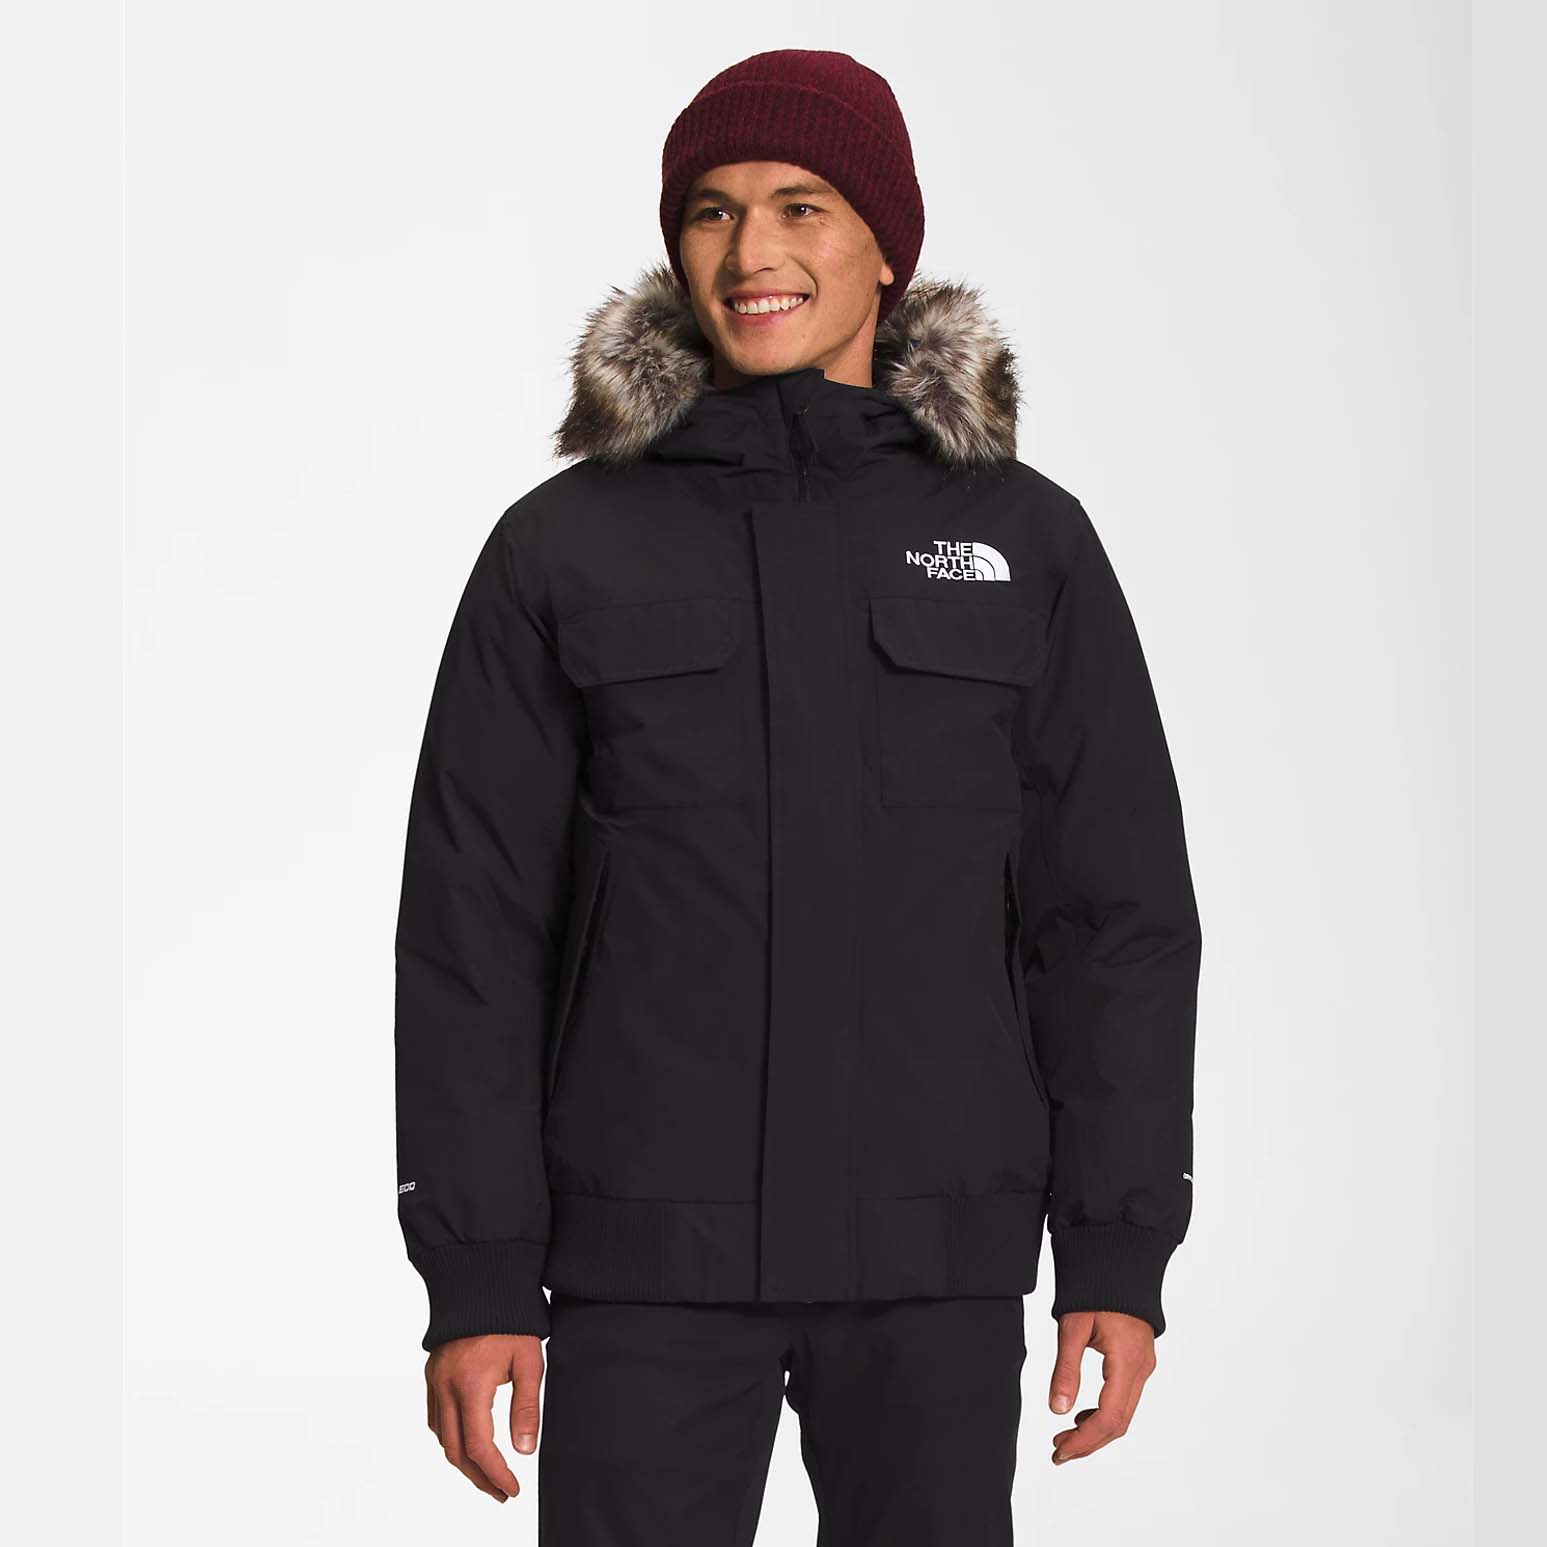 man wearing The North Face Men’s McMurdo Bomber in black with a red beanie